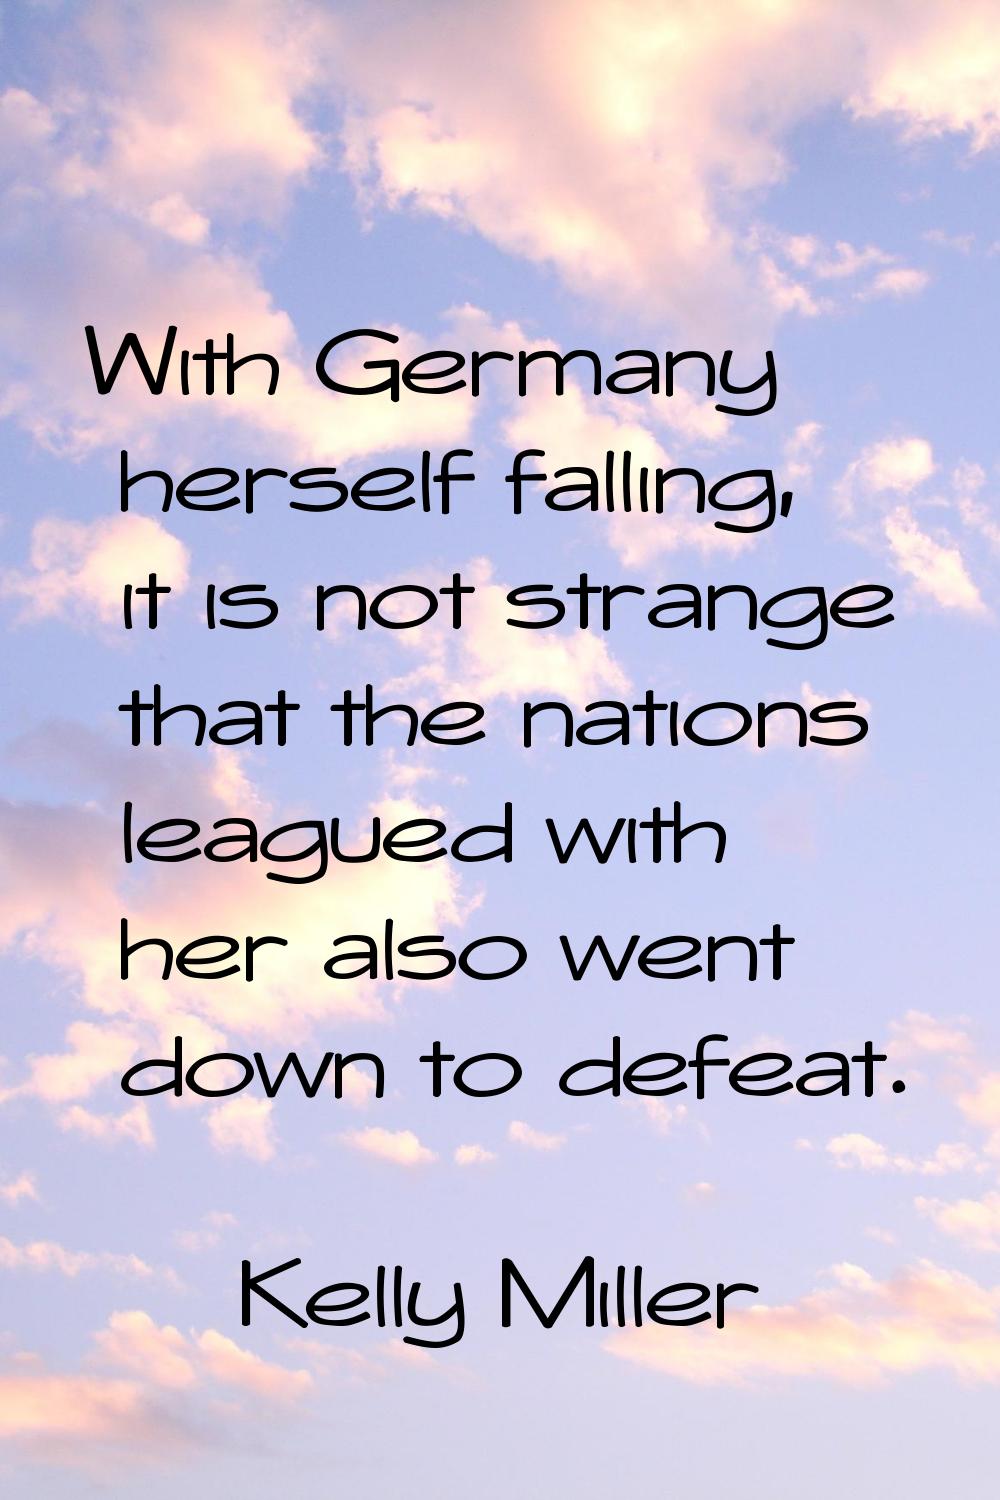 With Germany herself falling, it is not strange that the nations leagued with her also went down to